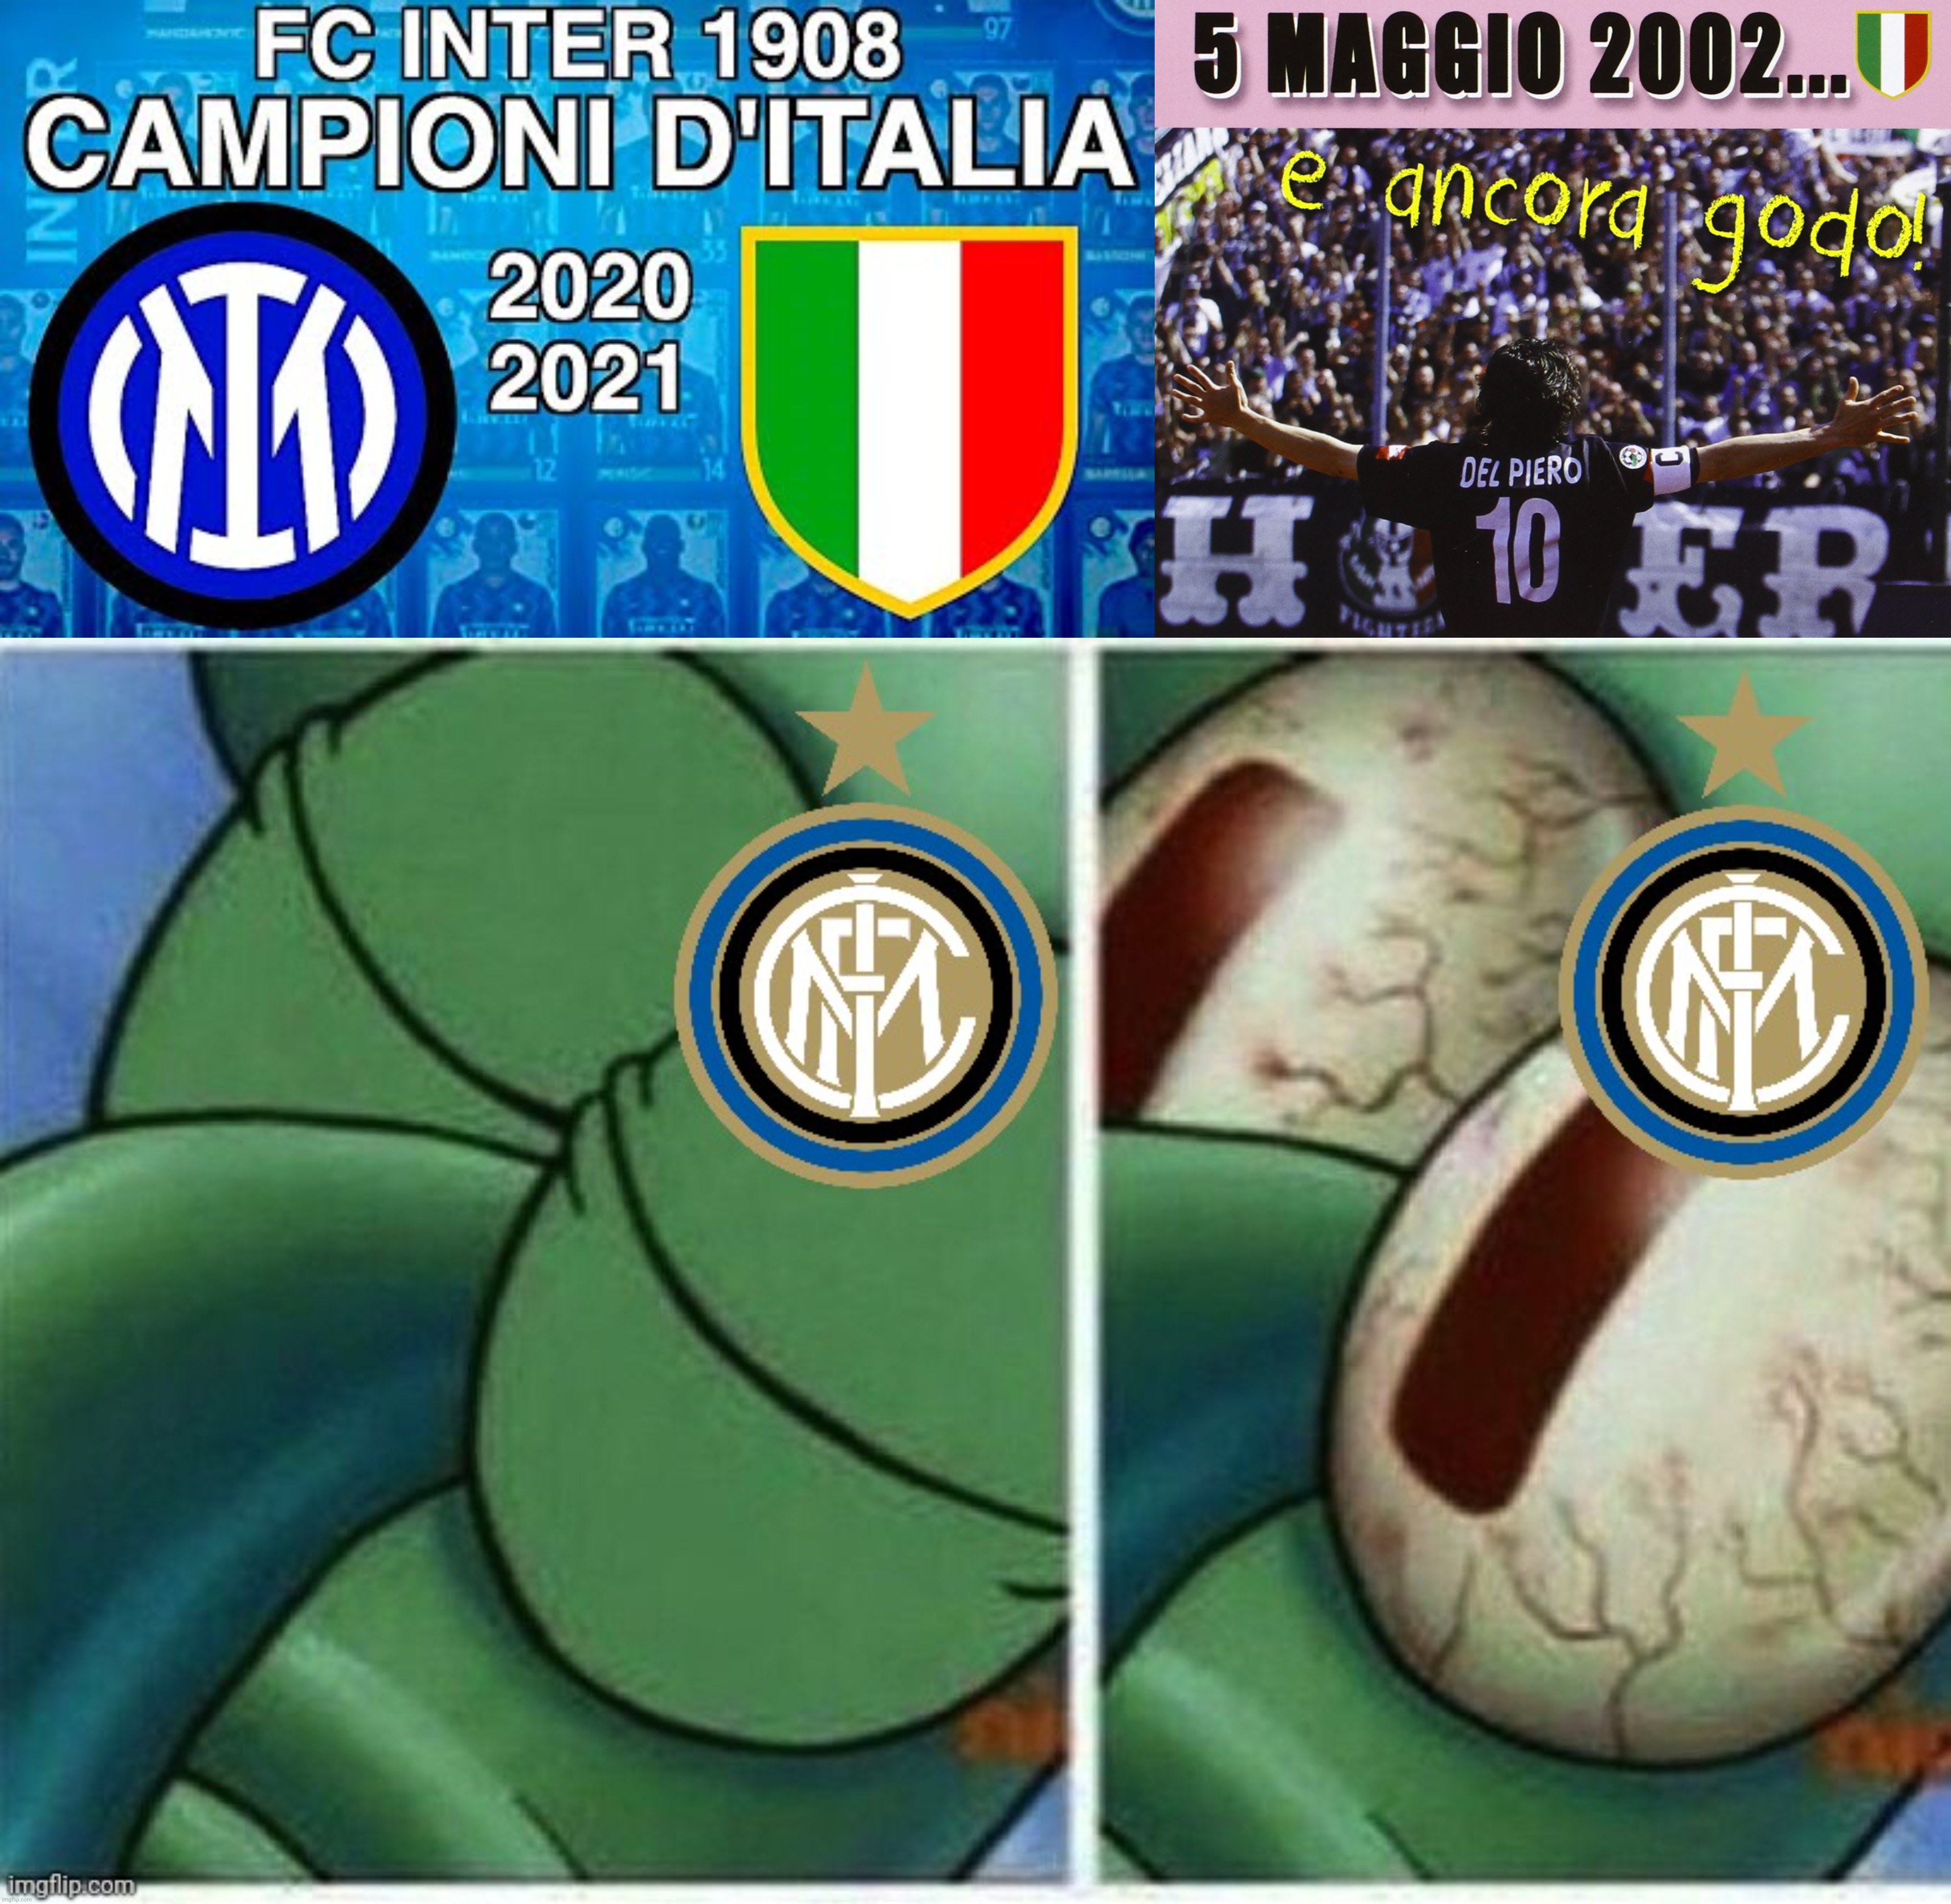 Trolololololololololololololololololololololol | image tagged in memes,inter,juventus,scudetto 19,5 maggio 2002,funny | made w/ Imgflip meme maker